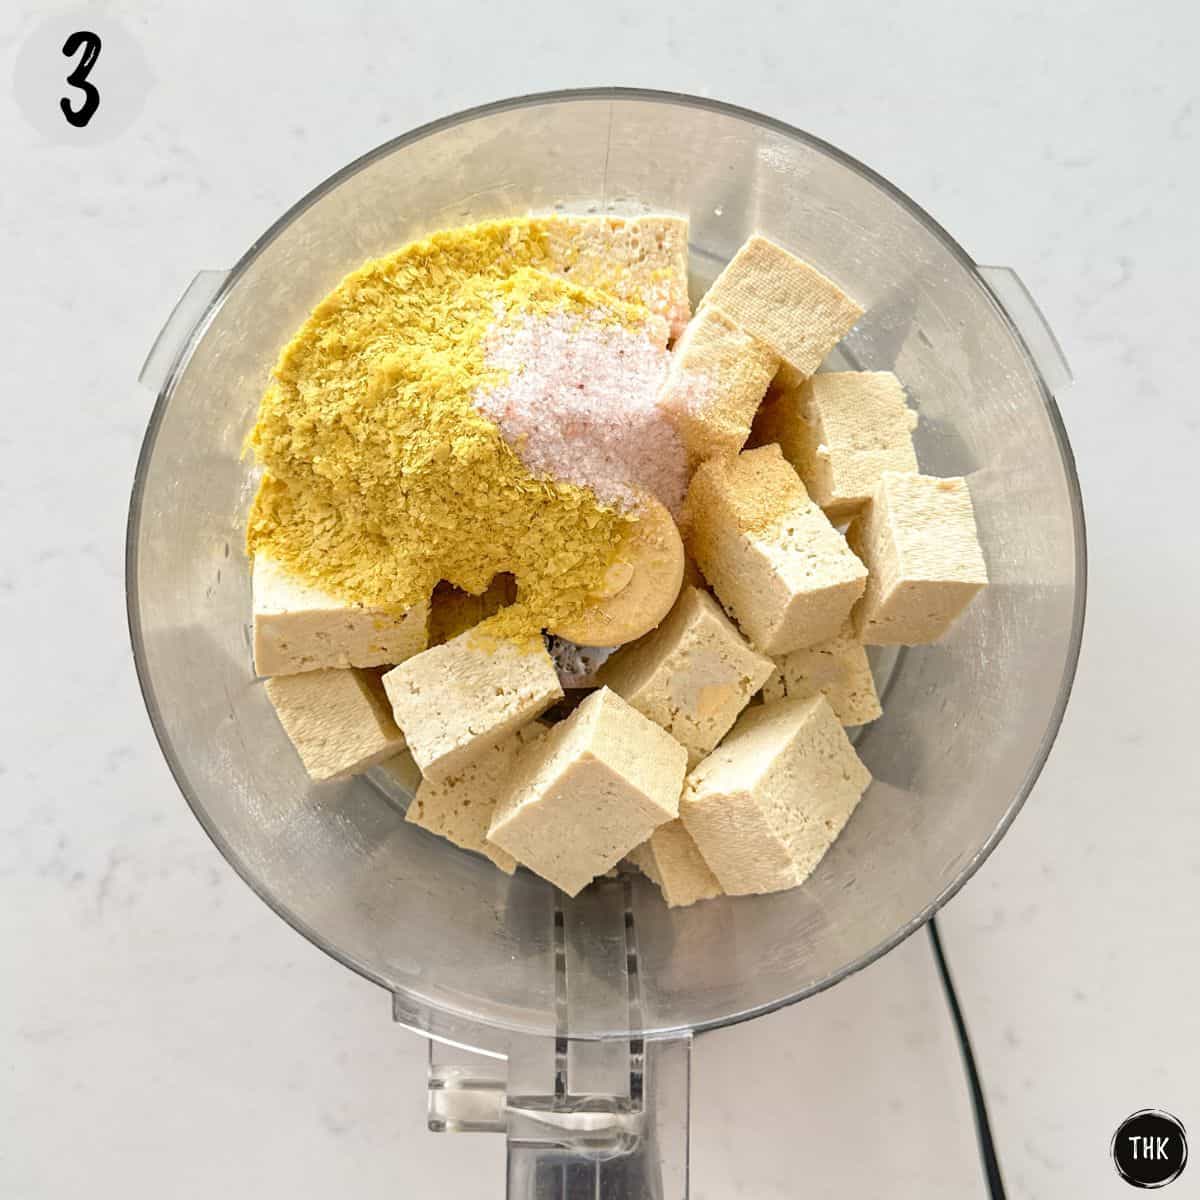 Tofu pieces, nutritional yeast, vinegar, and spices inside food processor.